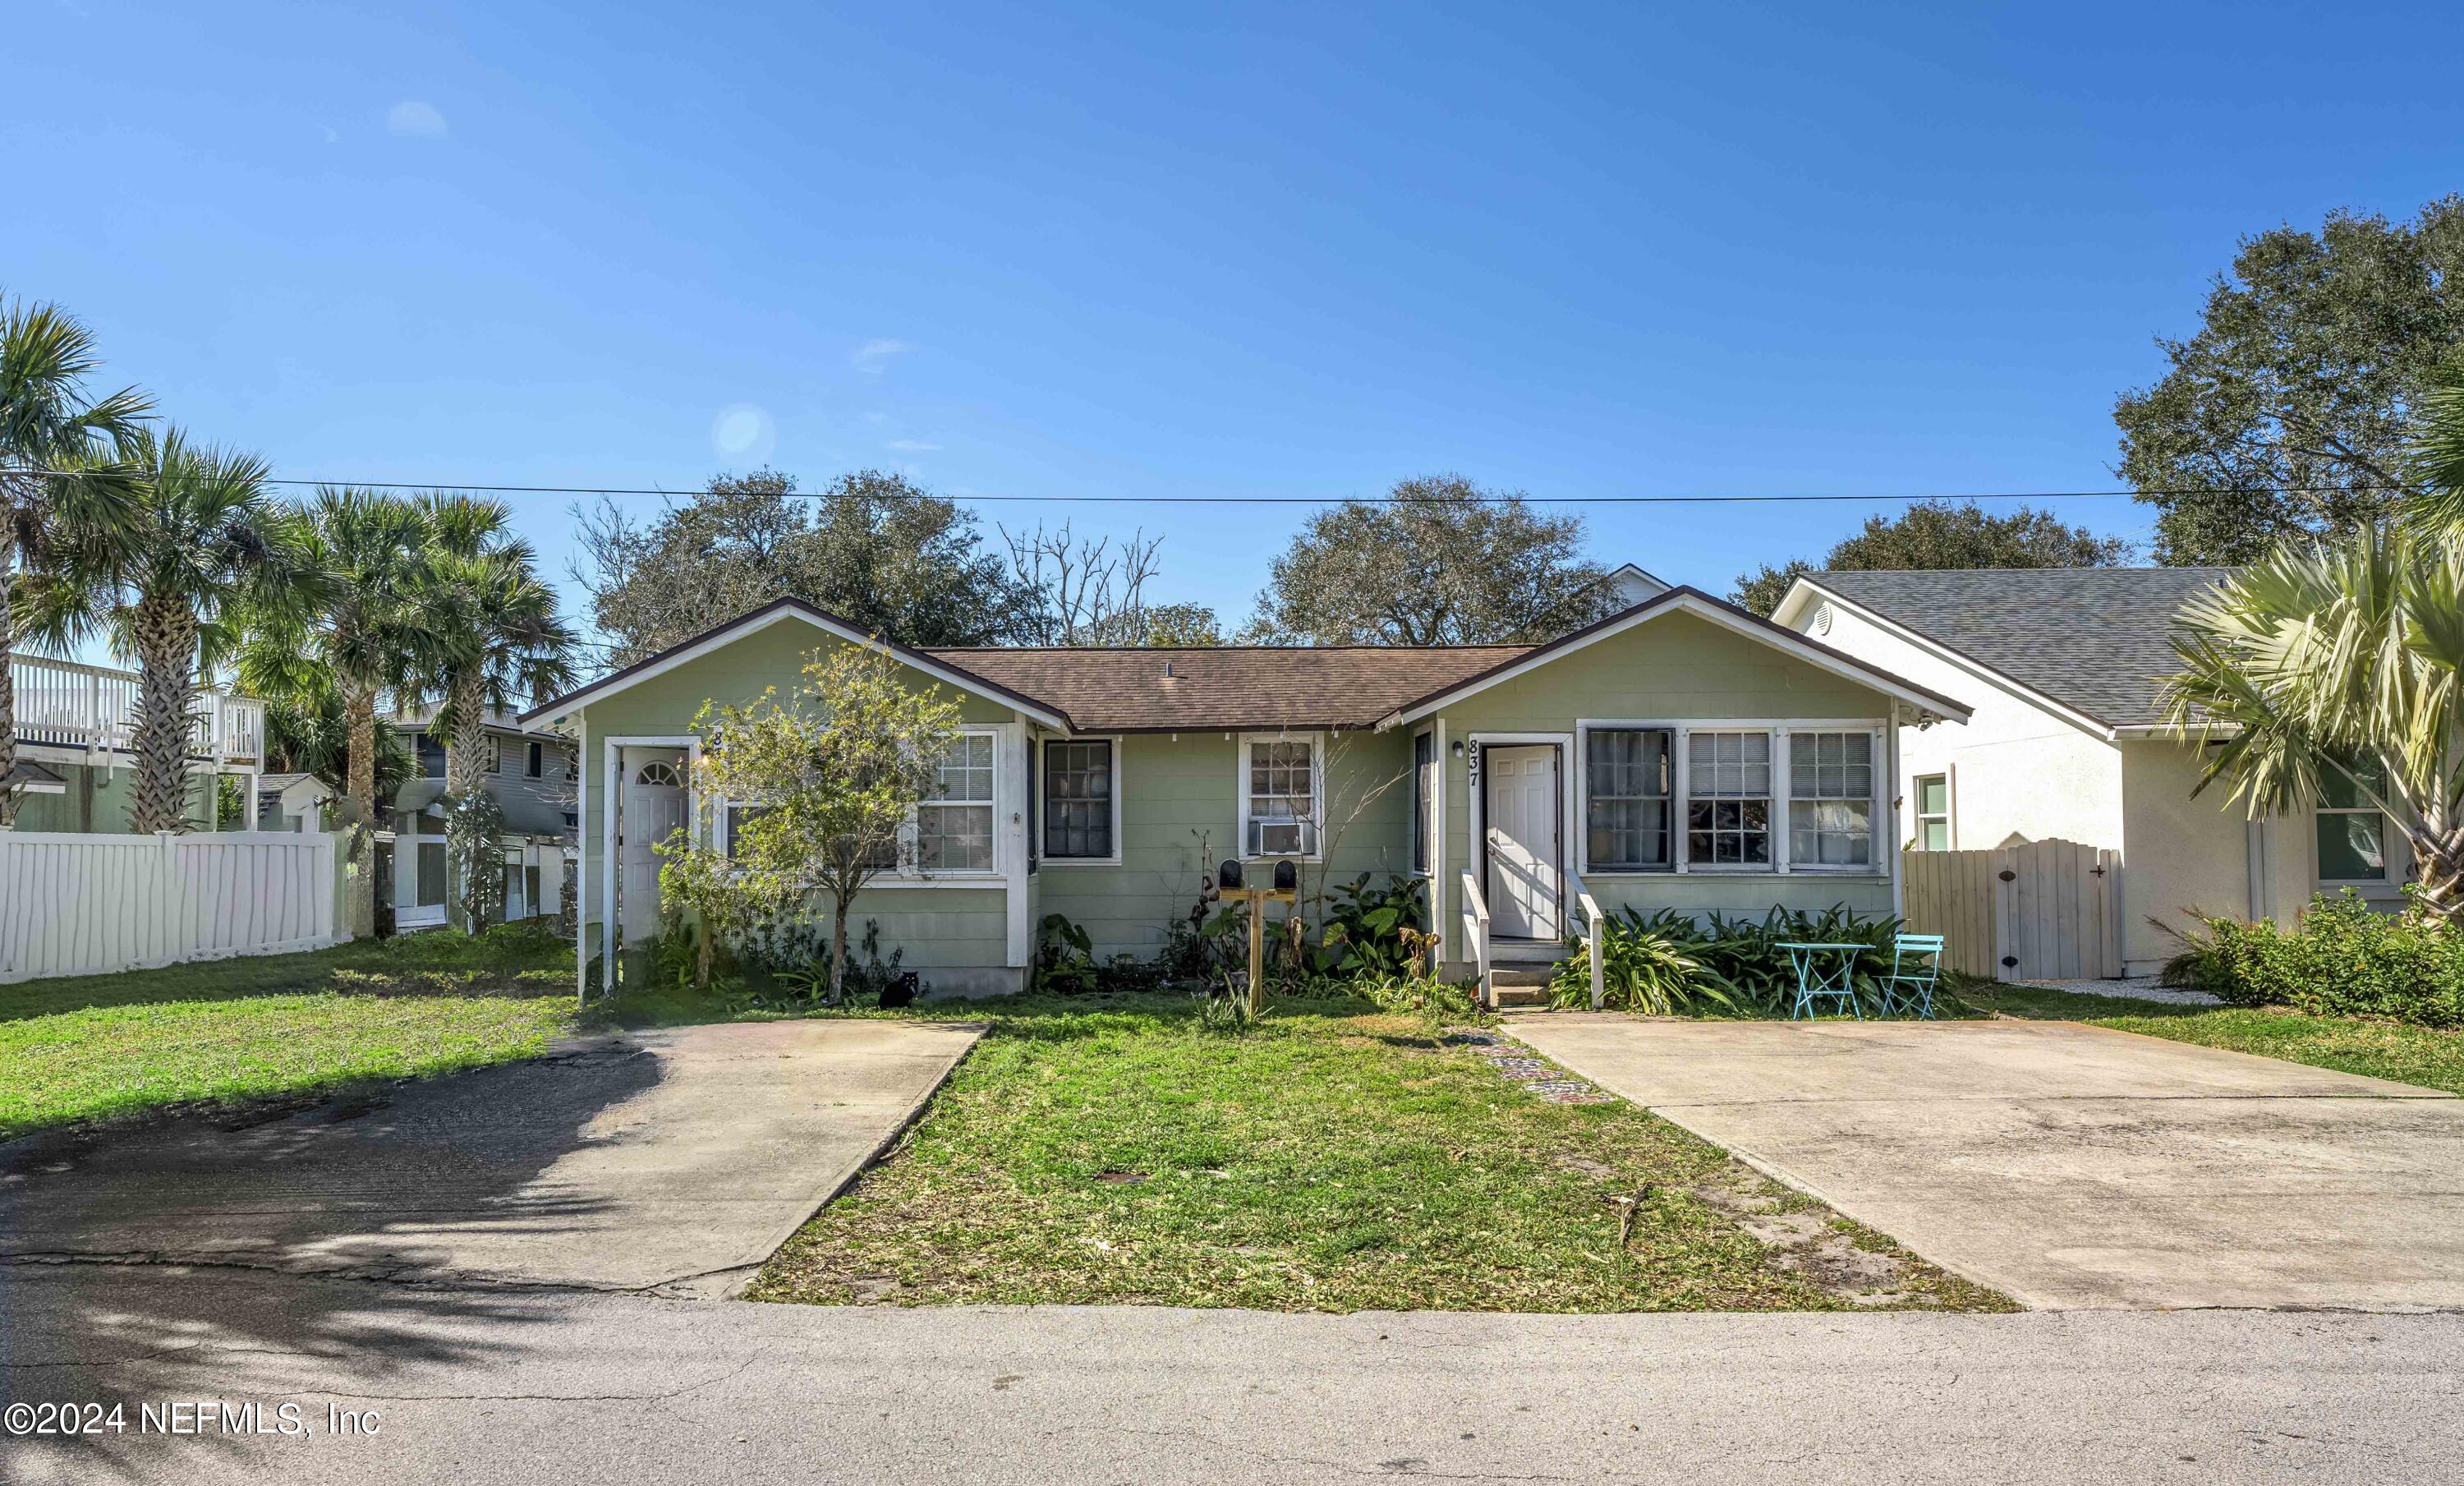 Jacksonville Beach, FL home for sale located at 835 5th Street N, Jacksonville Beach, FL 32250